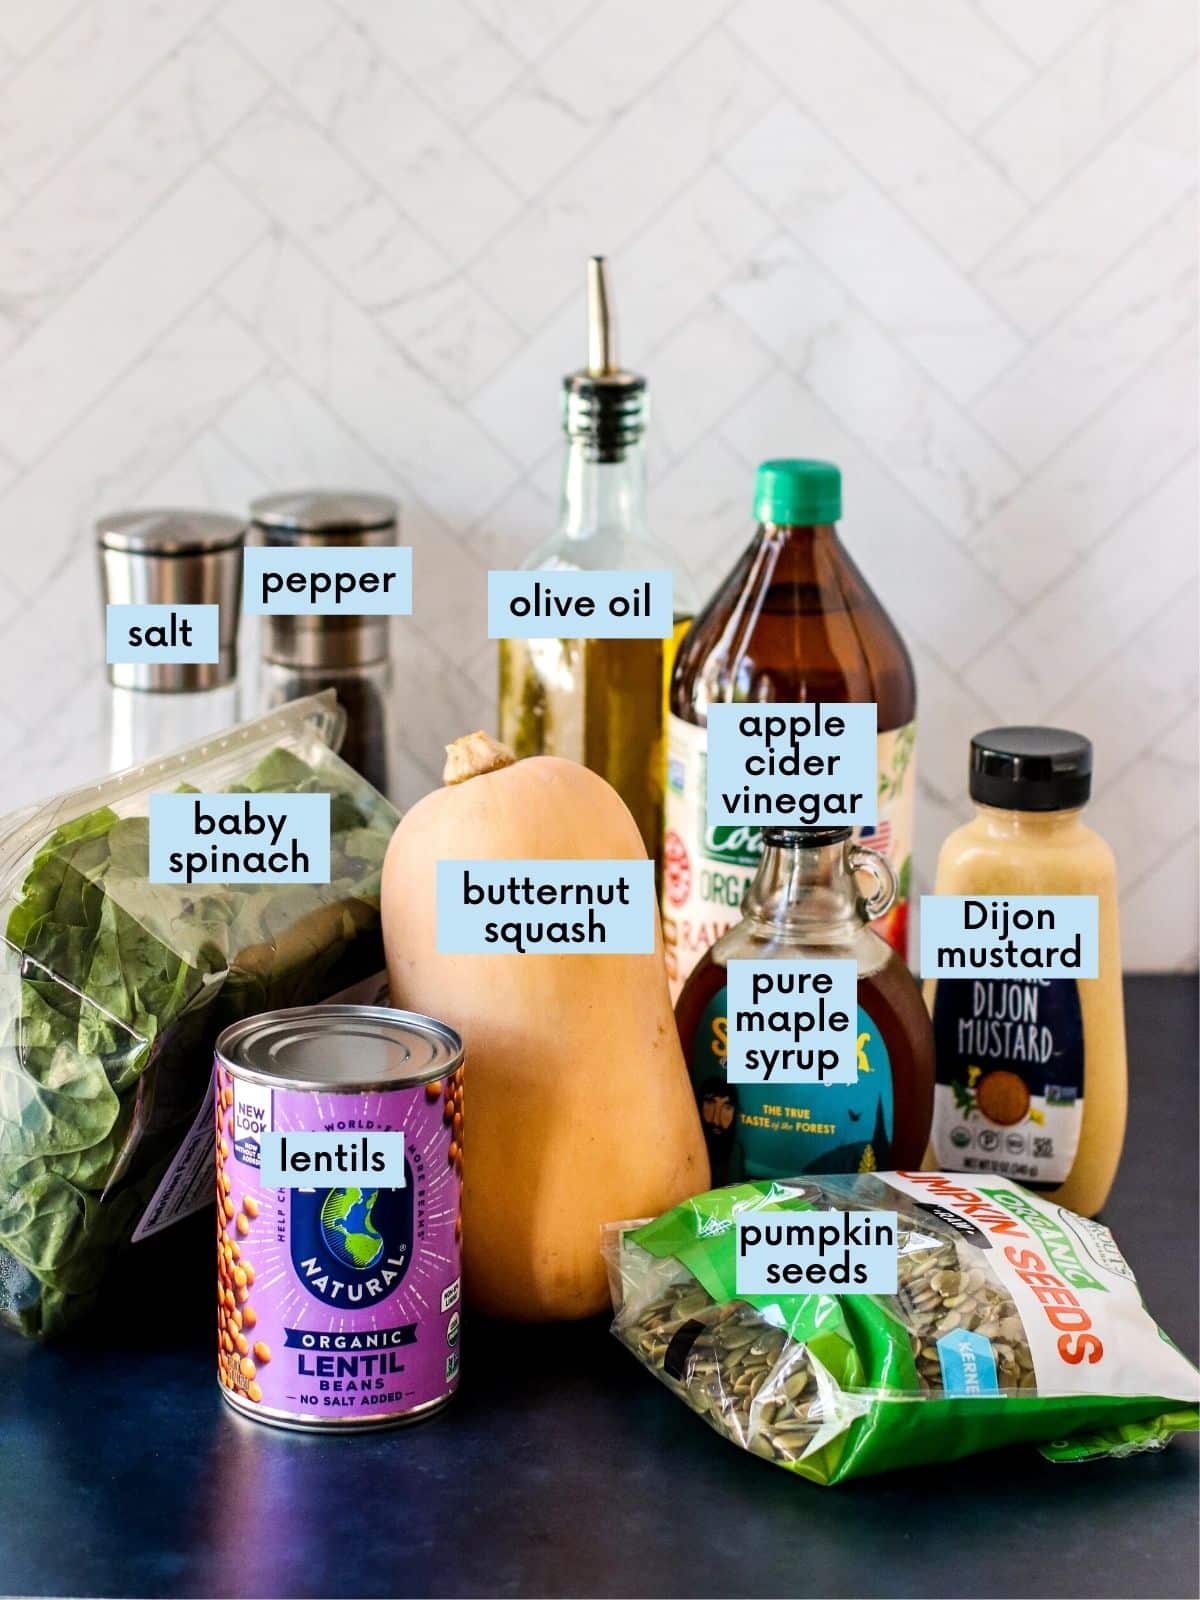 Labeled ingredients needed to make this Butternut Squash Spinach Salad: can of lentils, container of baby spinach, butternut squash, bag of pumpkin seeds, bottle of pure maple syrup, bottle of apple cider vinegar, bottle of Dijon mustard, bottle of olive oil, and salt and pepper.